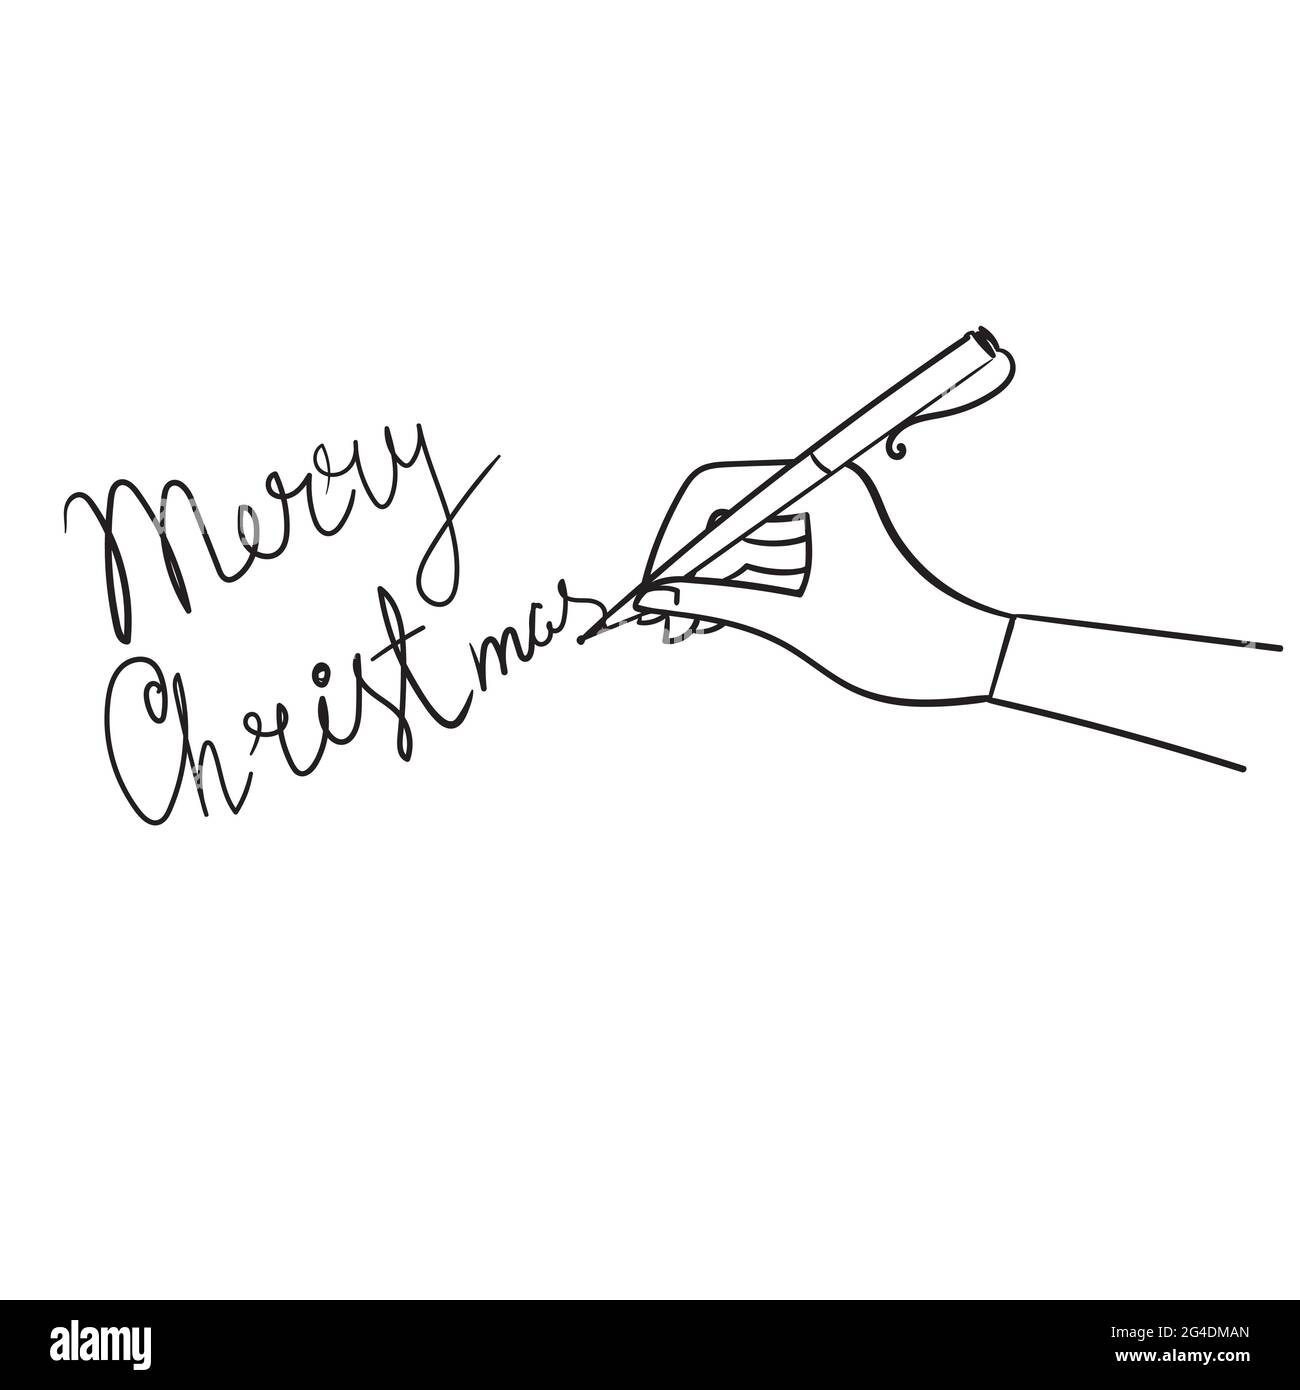 Hand with a pen. Woman writes Merry Christmas, Hand drawing. Linear stock illustration isolated on white background.Greeting card. Man writes a letter Stock Vector